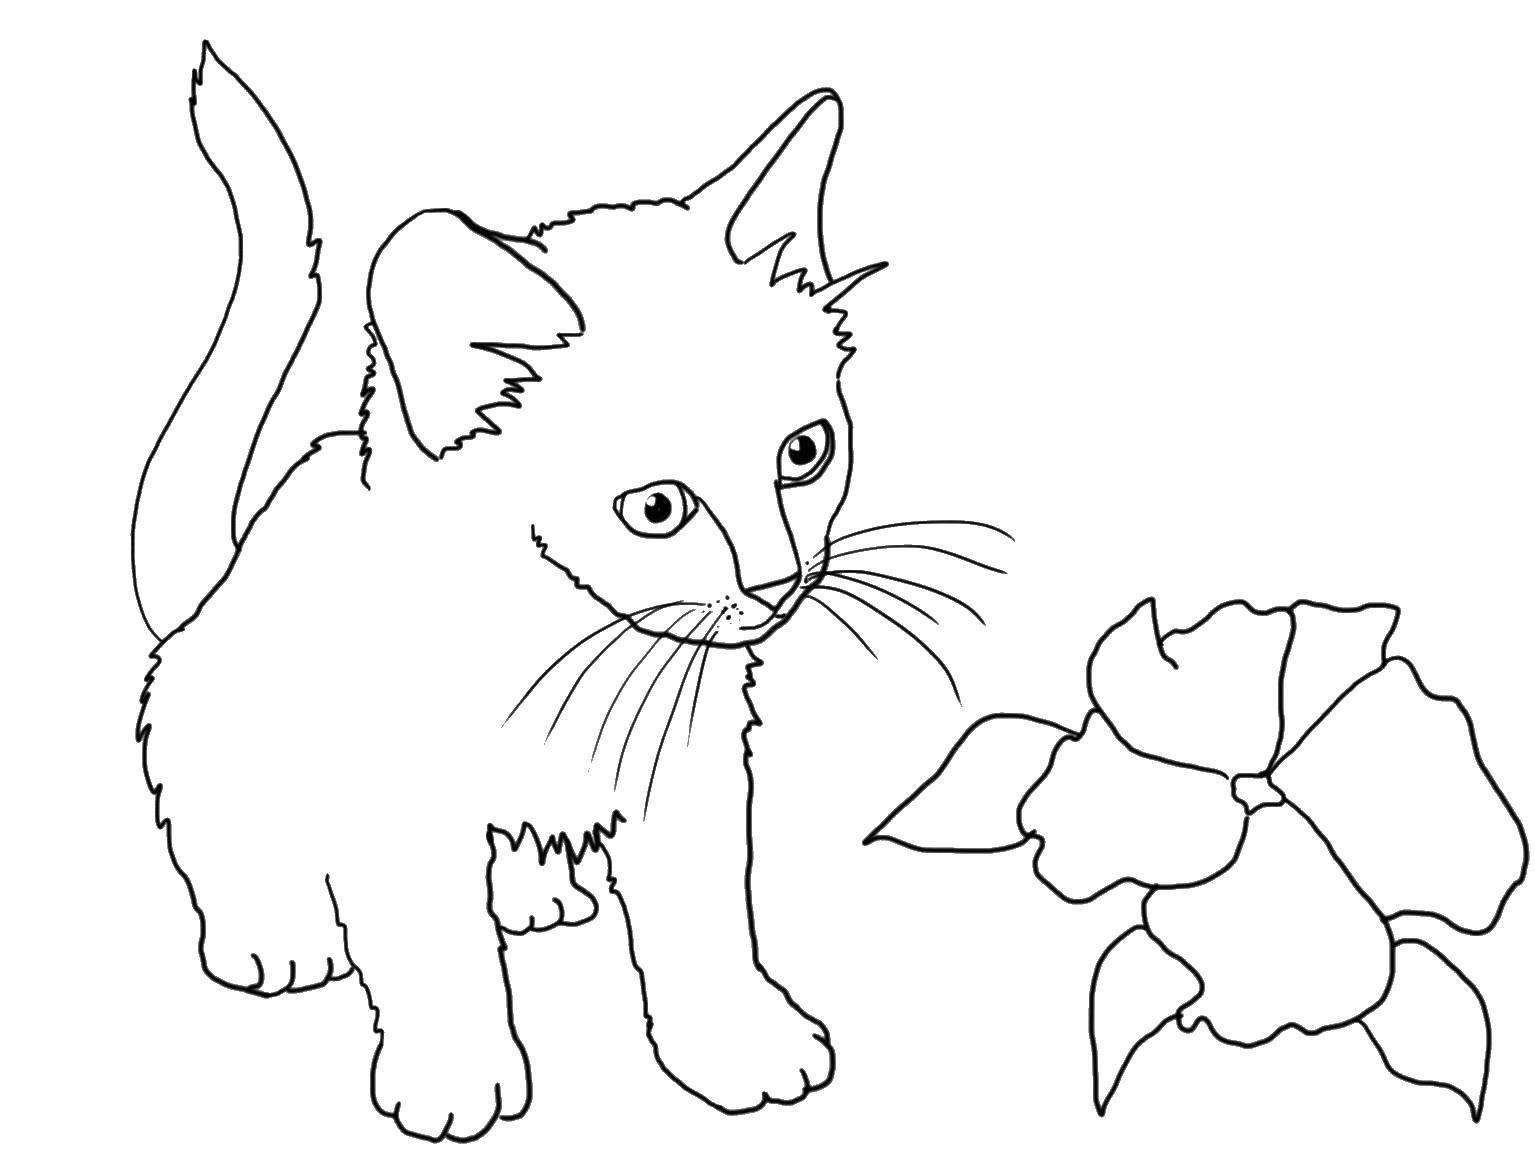 Coloring Kitten and flower. Category Cats and kittens. Tags:  Animals, kitten.